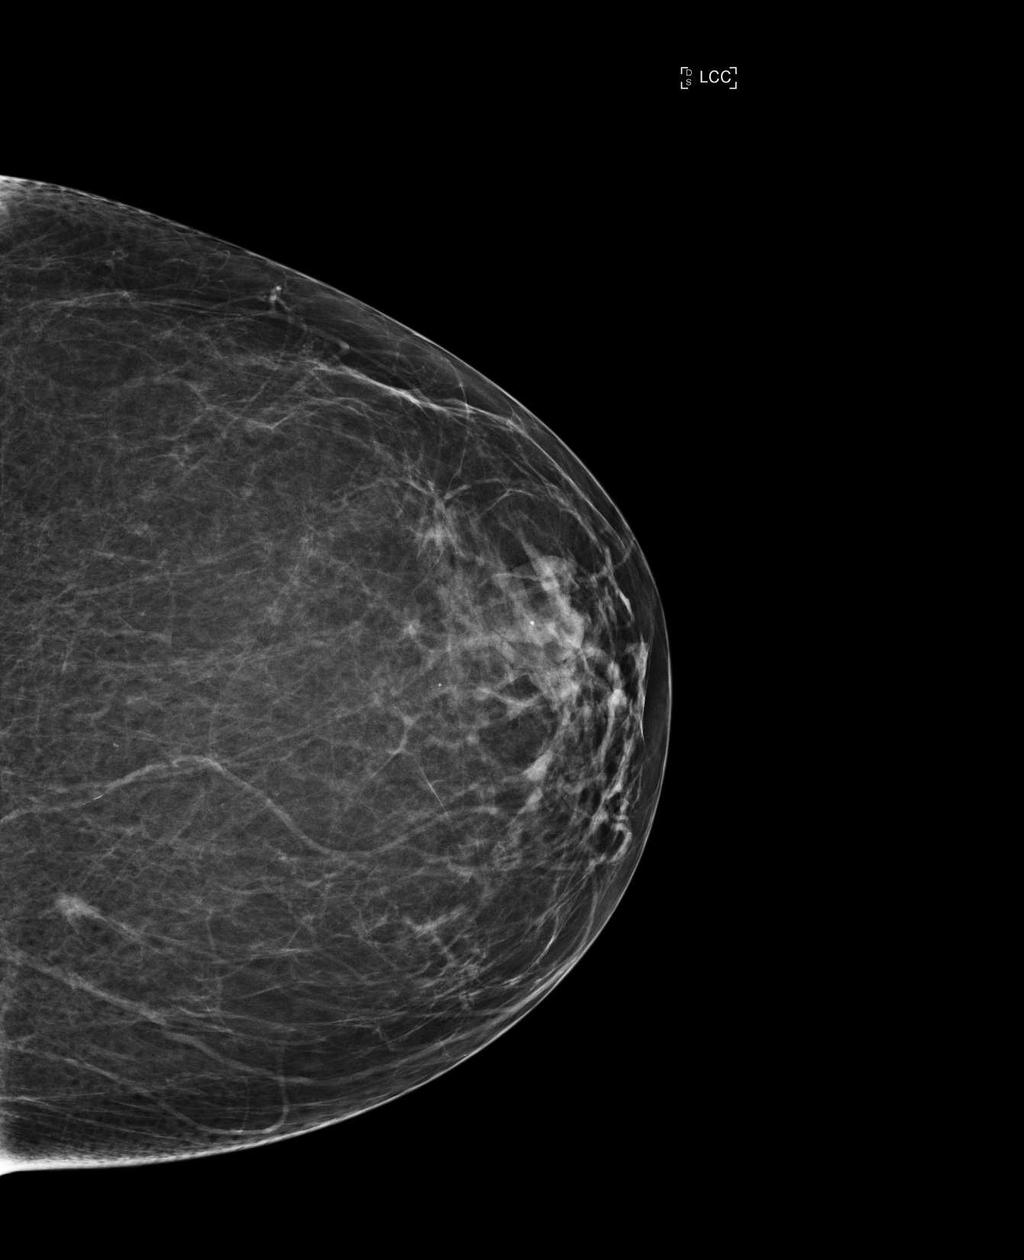 : Utilization of DBT with conventional mammography decreased recall rates for all patients and all breast densities Statistically significant decrease in recall rate for scattered, heterogeneously